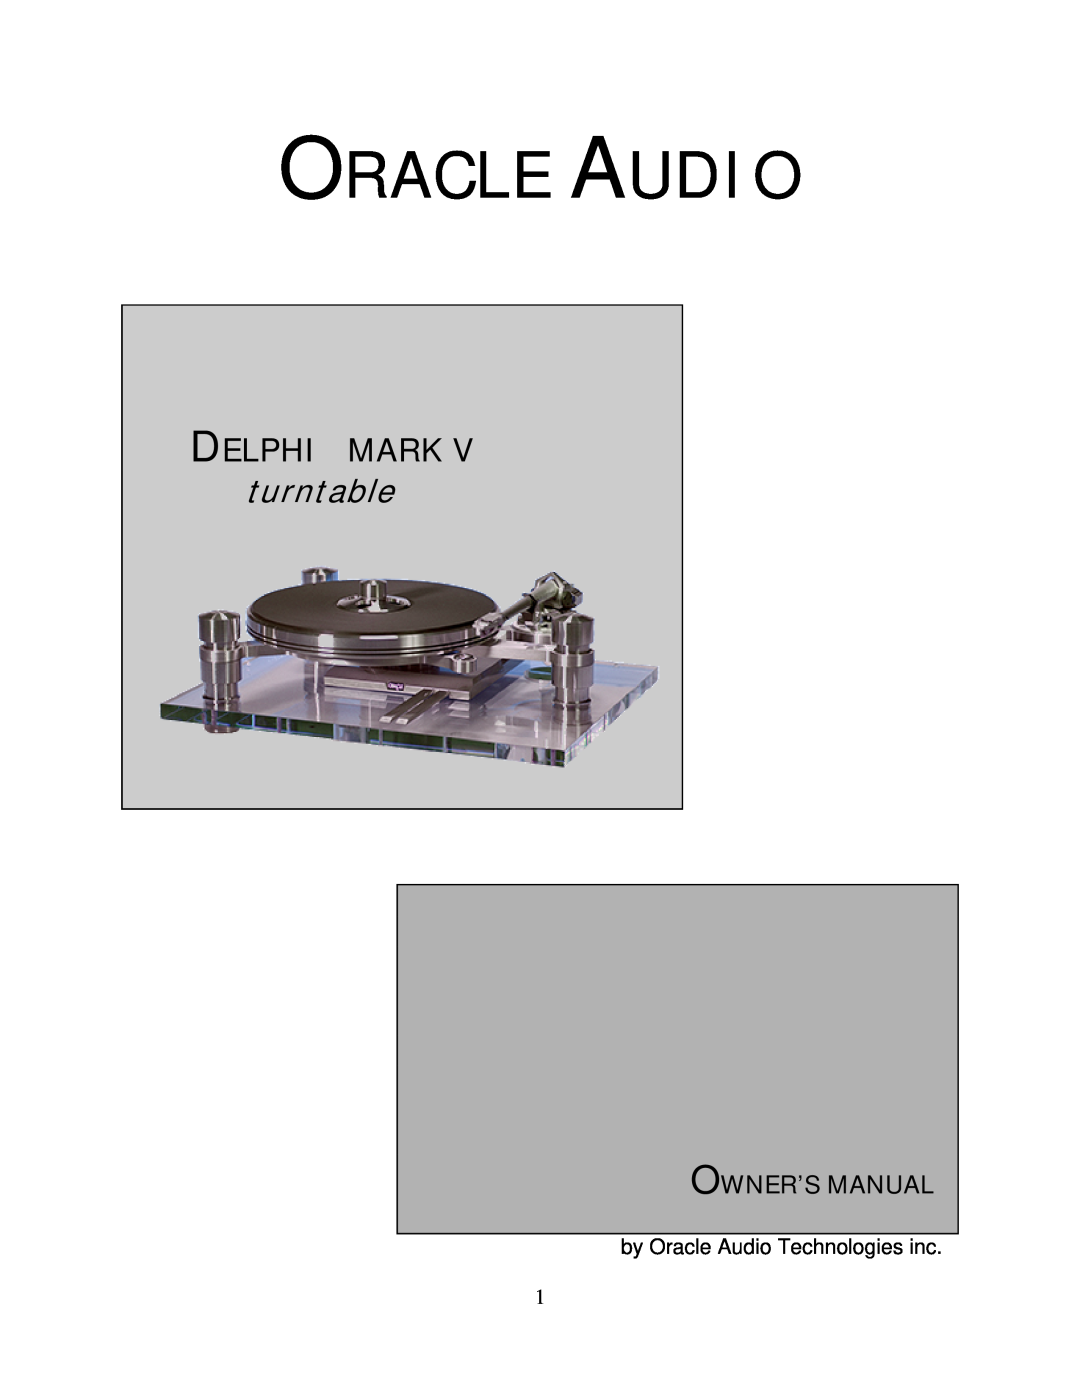 Oracle Audio Technologies V owner manual Delphi Mark, turntable, by Oracle Audio Technologies inc 